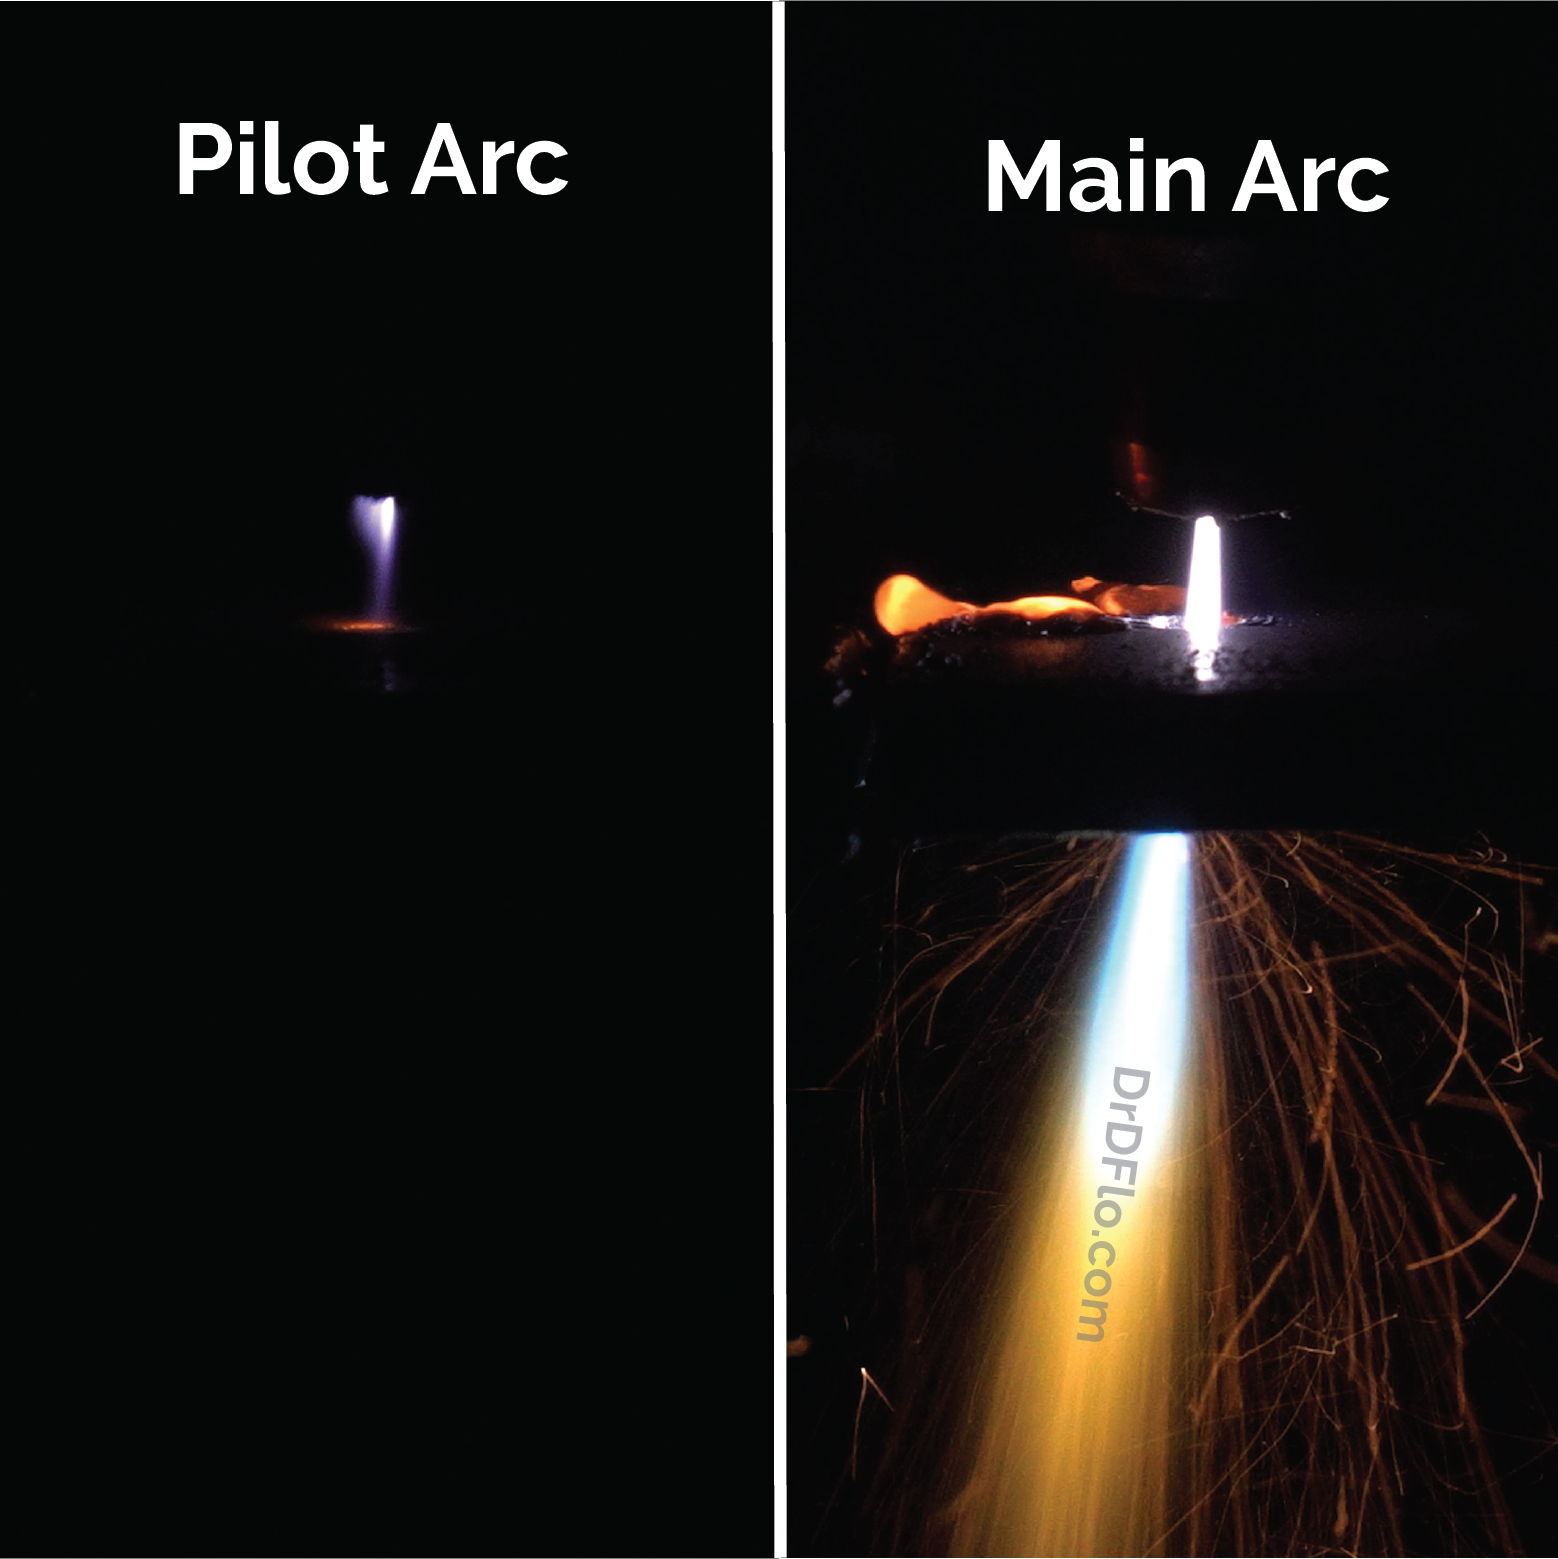 The difference between plasma cutter pilor arc and main or transfer arc.